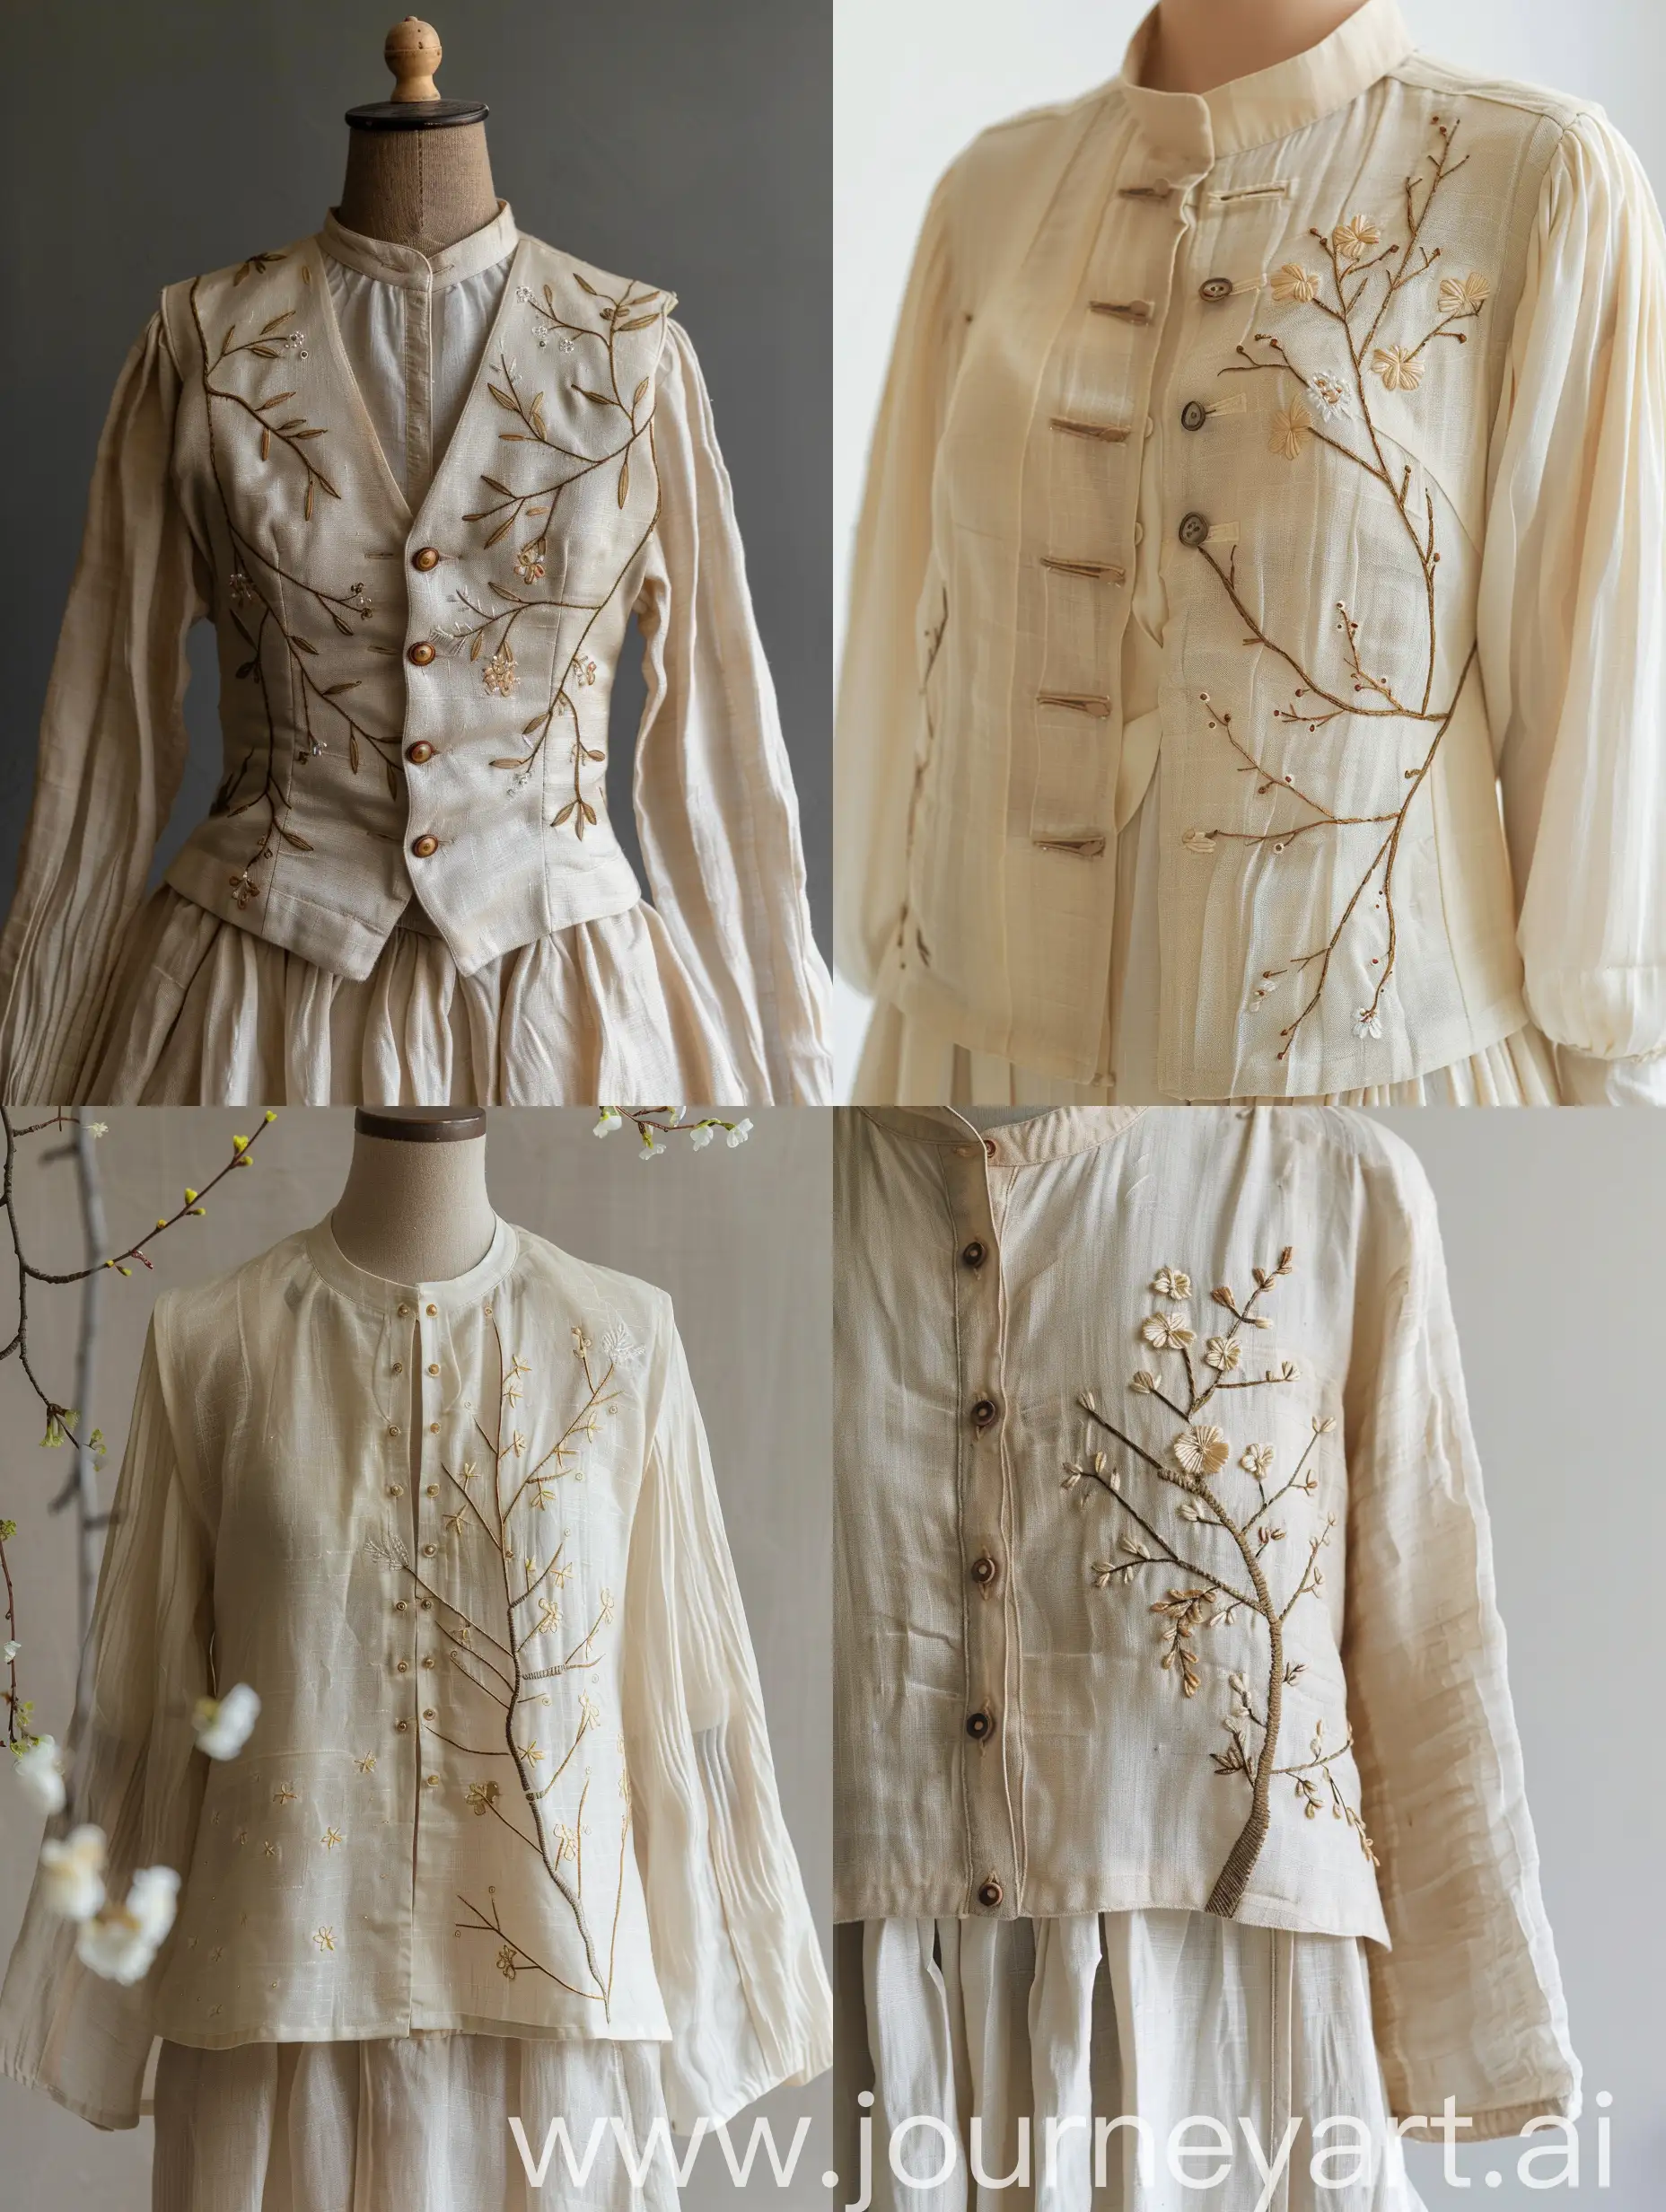 A blouse and a vest, shanton fabric, cream color, branch and small flower embroidery, button front